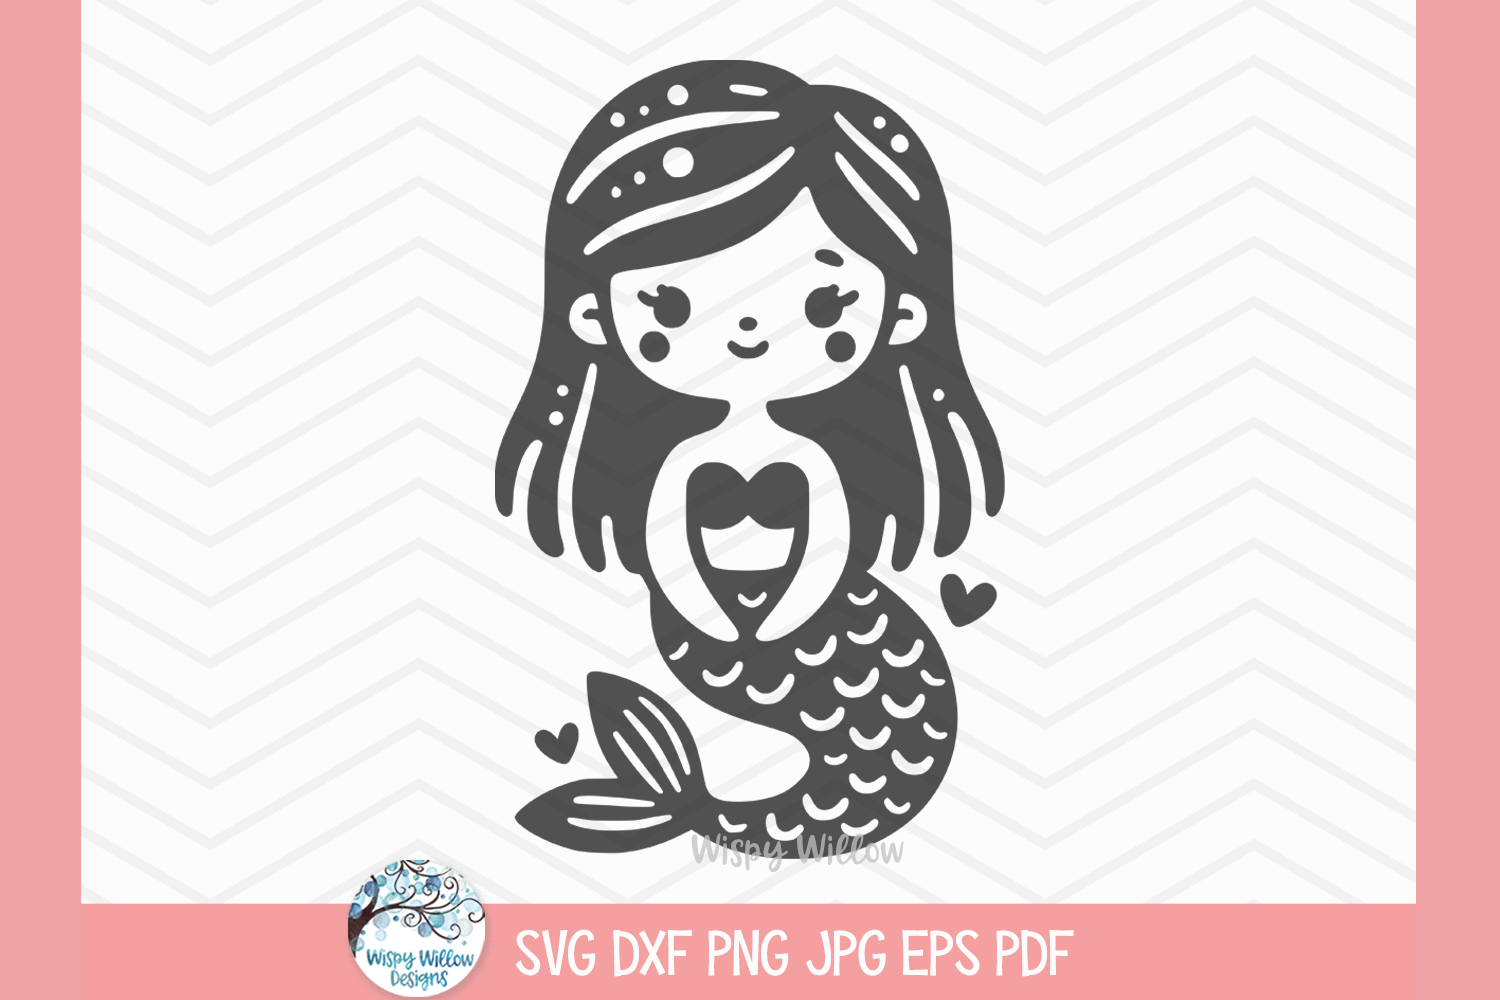 Mermaid SVG | Summer Vacation Clipart Wispy Willow Designs Company